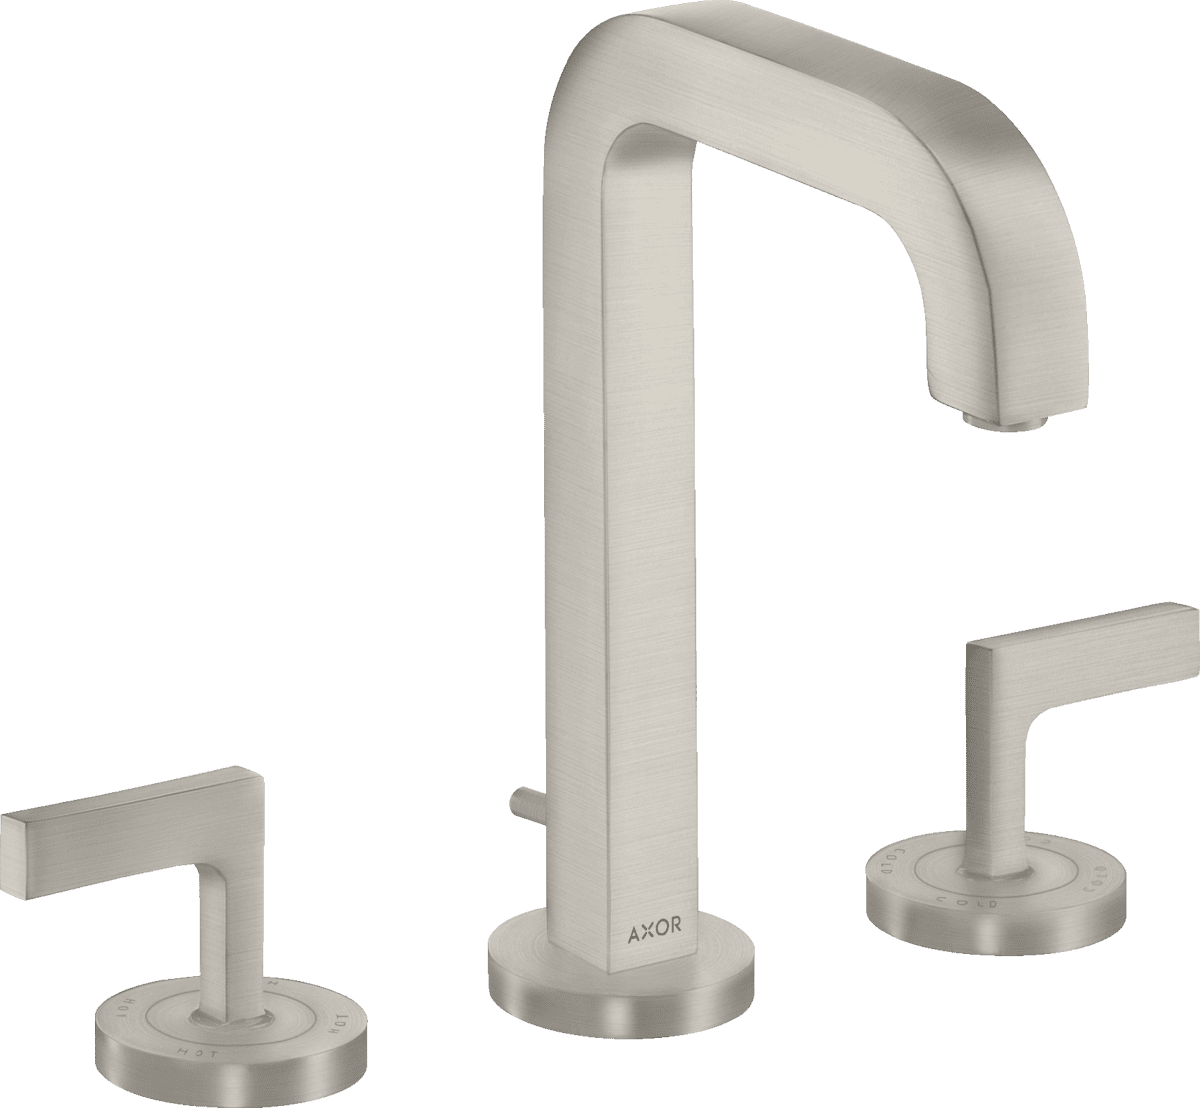 Picture of HANSGROHE AXOR Citterio 3-hole basin mixer 170 with spout 140 mm, lever handles, escutcheons and pop-up waste set #39135800 - Stainless Steel Optic